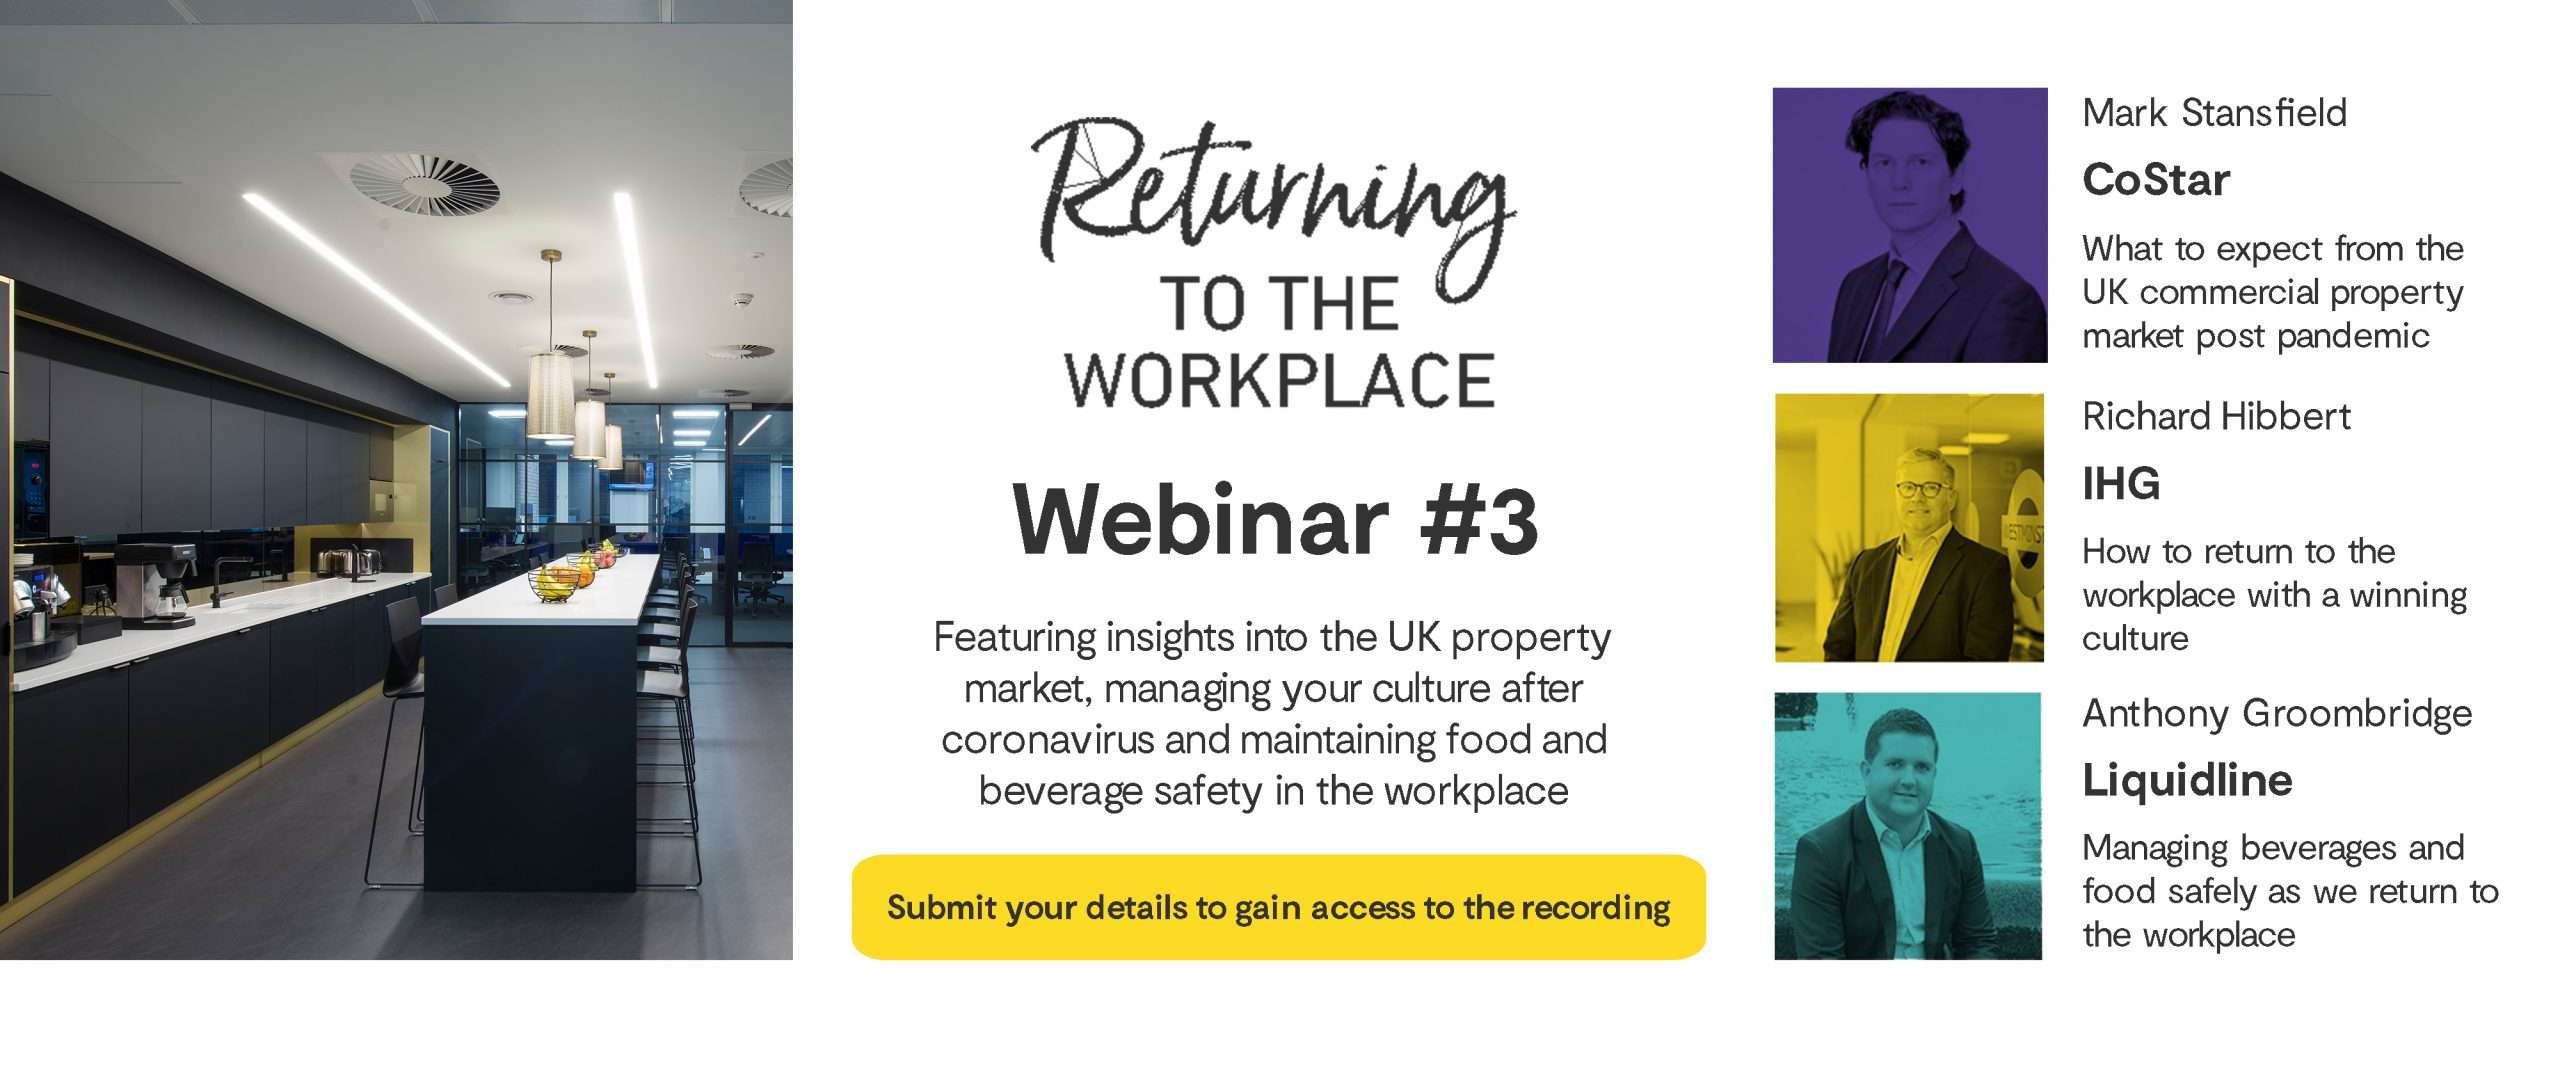 Returning To The Workplace Webinar #3 – 12:30 GMT Thursday 7th May 2020